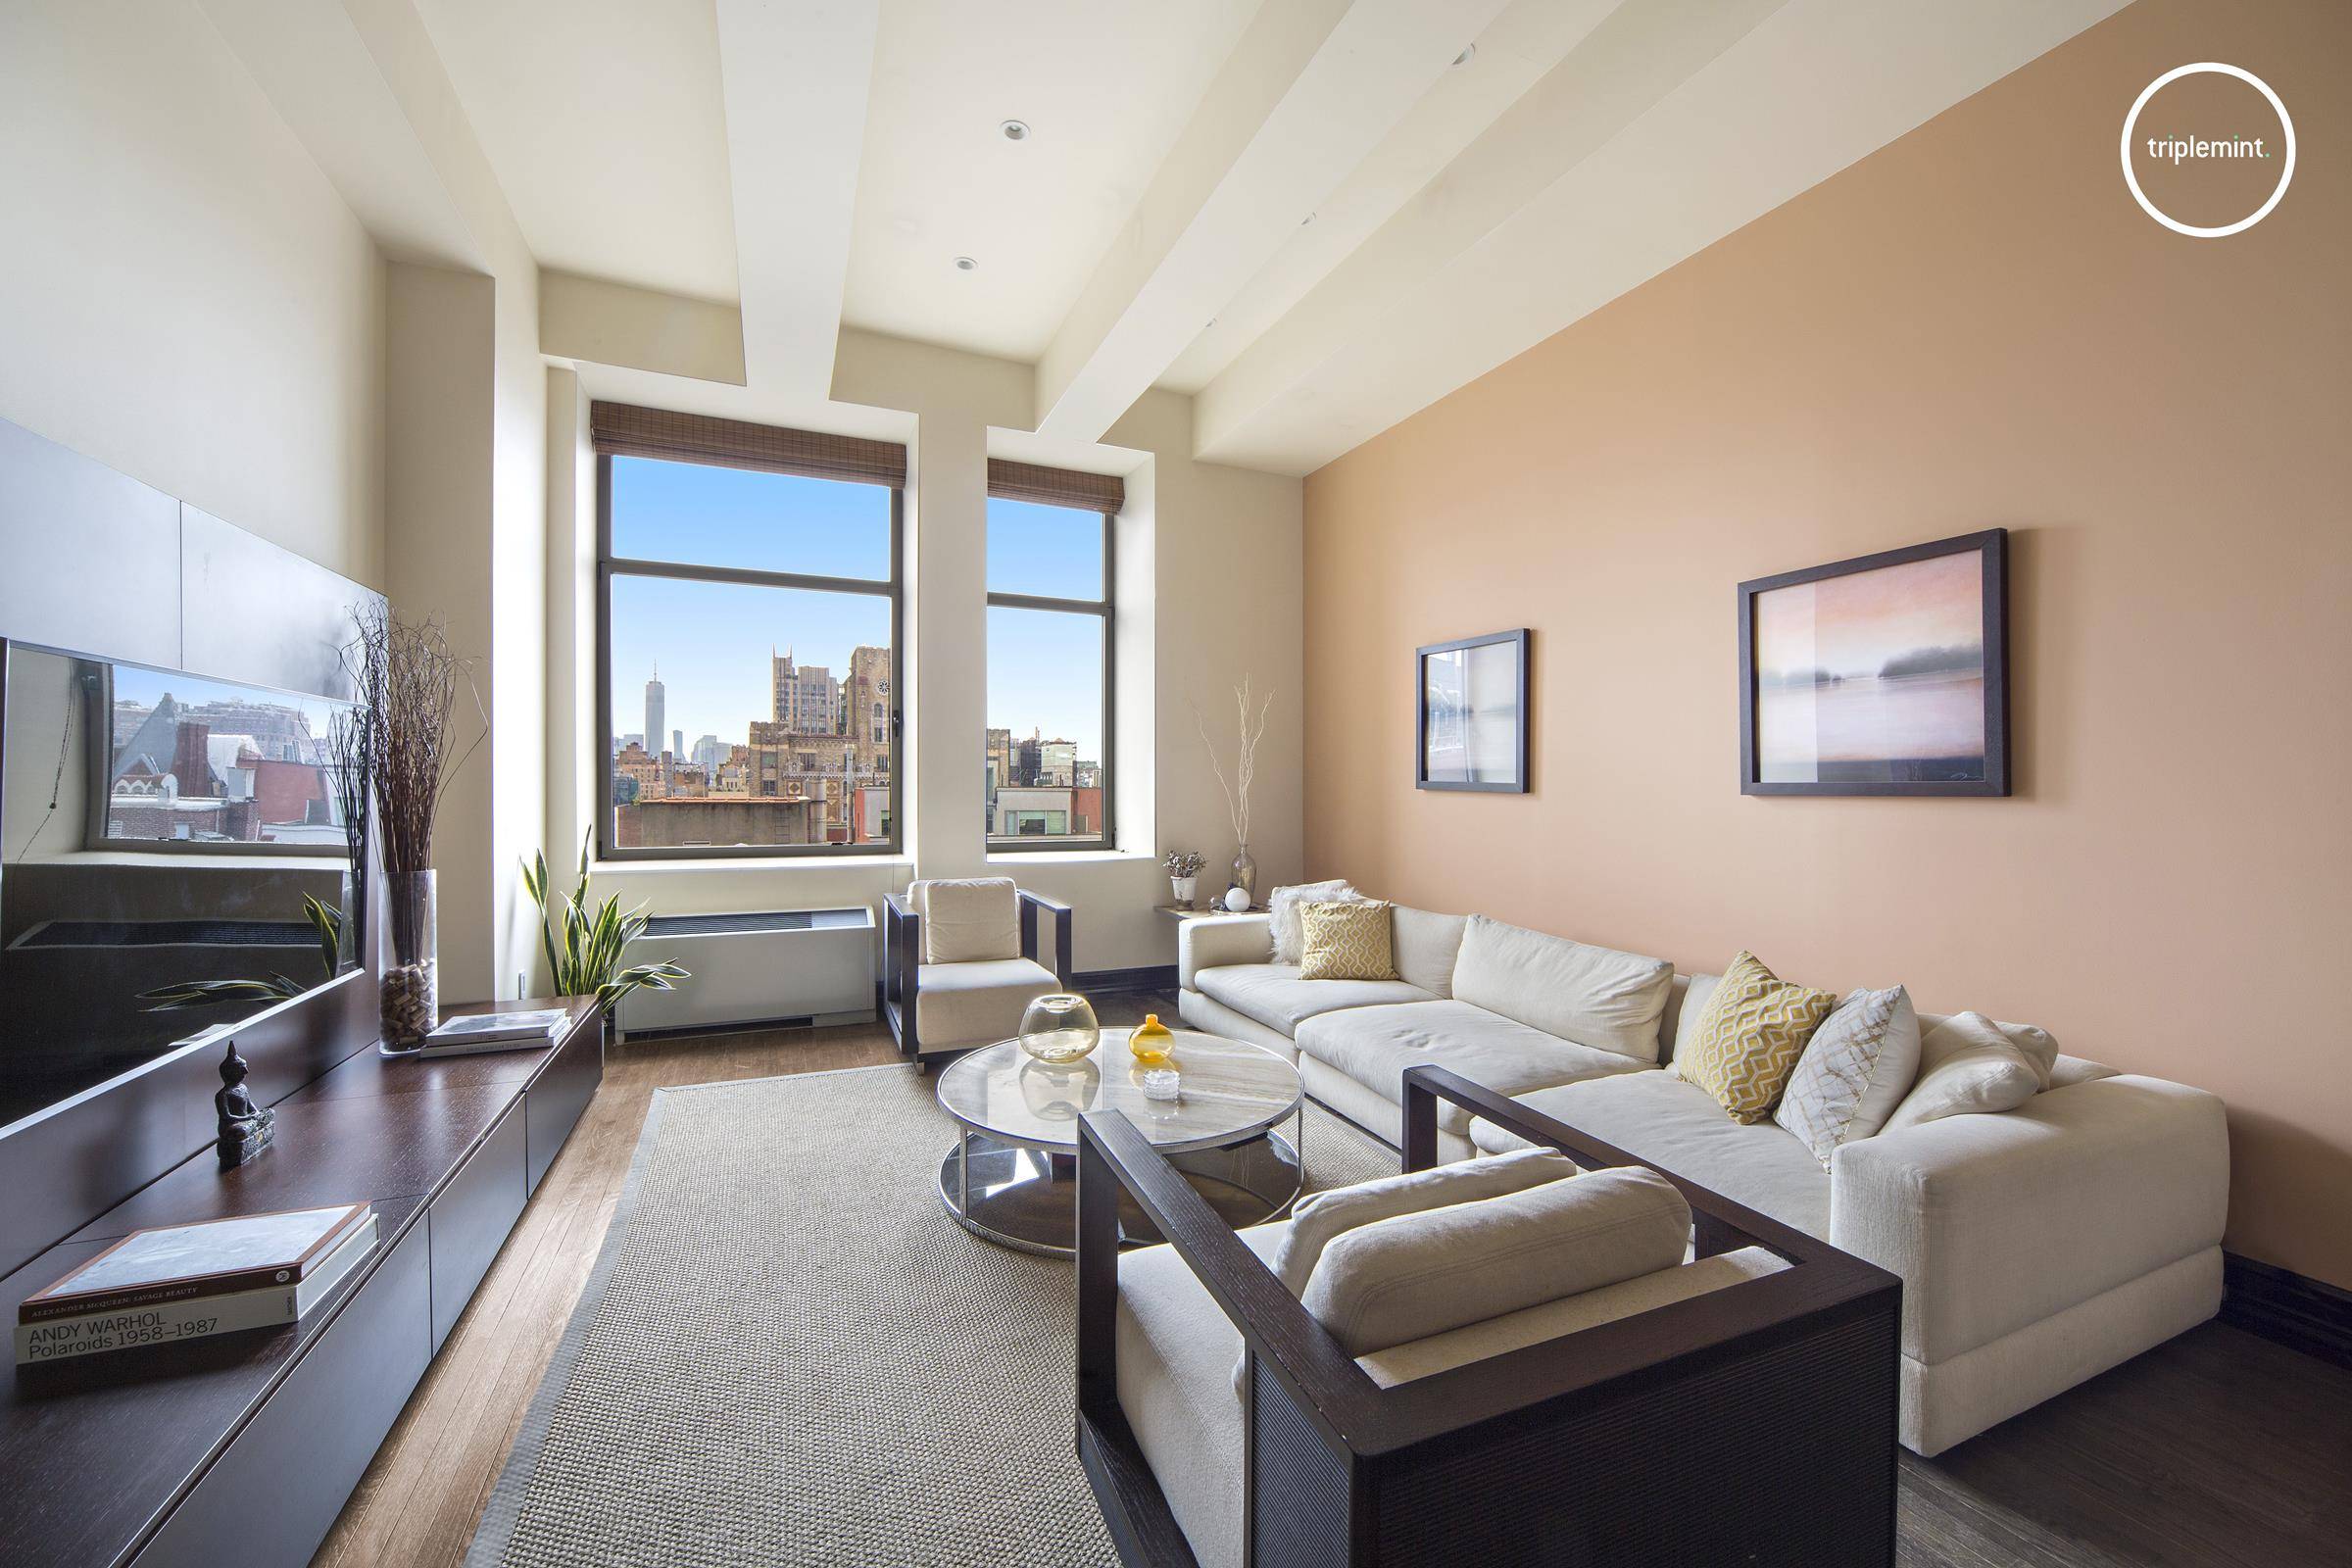 The best value in the condominium s last decade, apartment 12T is the epitome of luxury, convenience, and comfort, nestled in one of Manhattan s most coveted buildings, The Chelsea ...